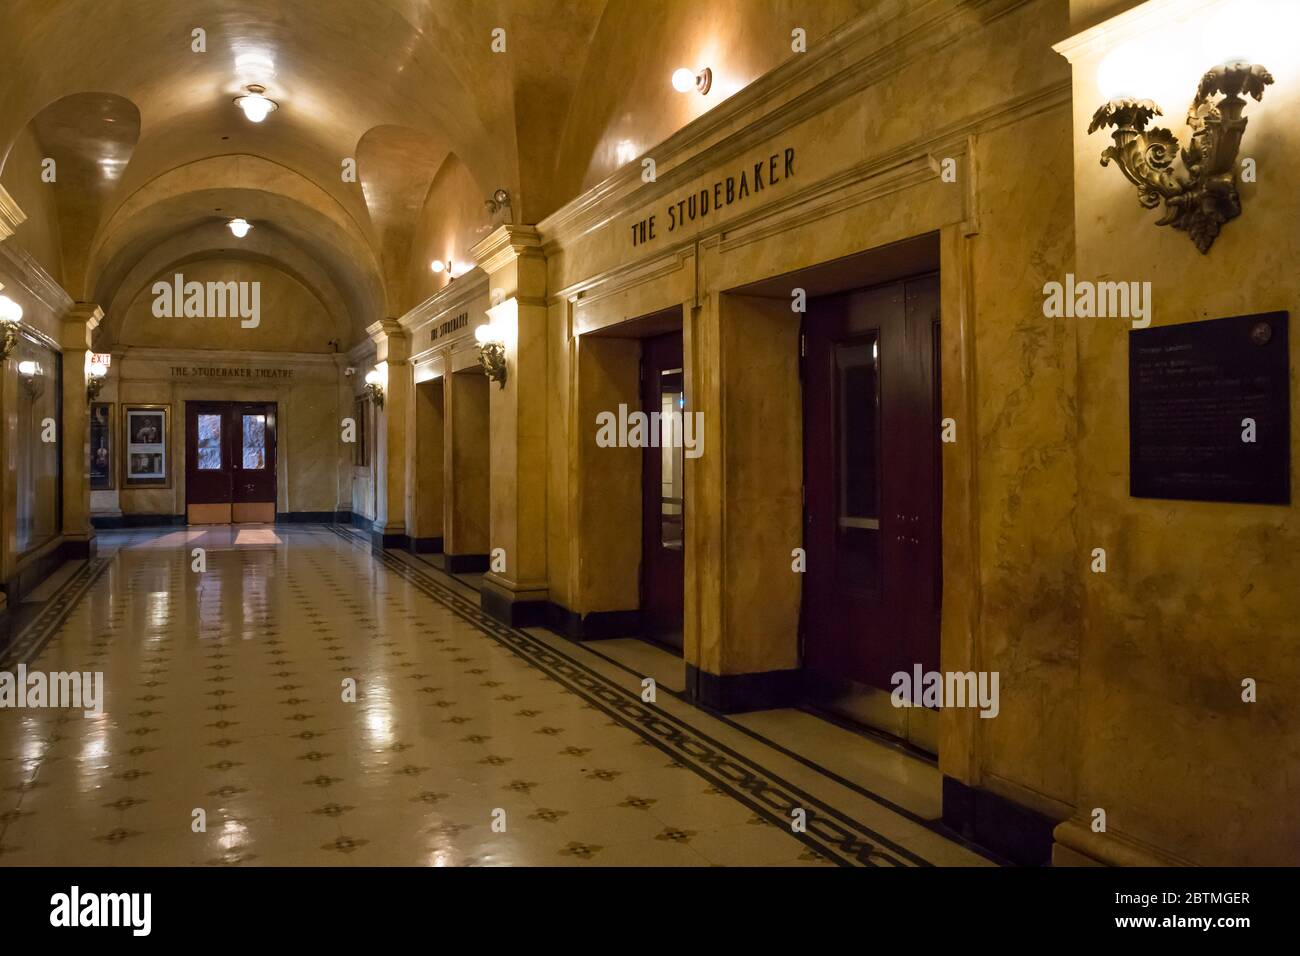 Horizontal shot of the some of the paintings and wooden decoration of the Fine Arts Building (Studebaker Building) interior, Chicago, Illinois, USA Stock Photo